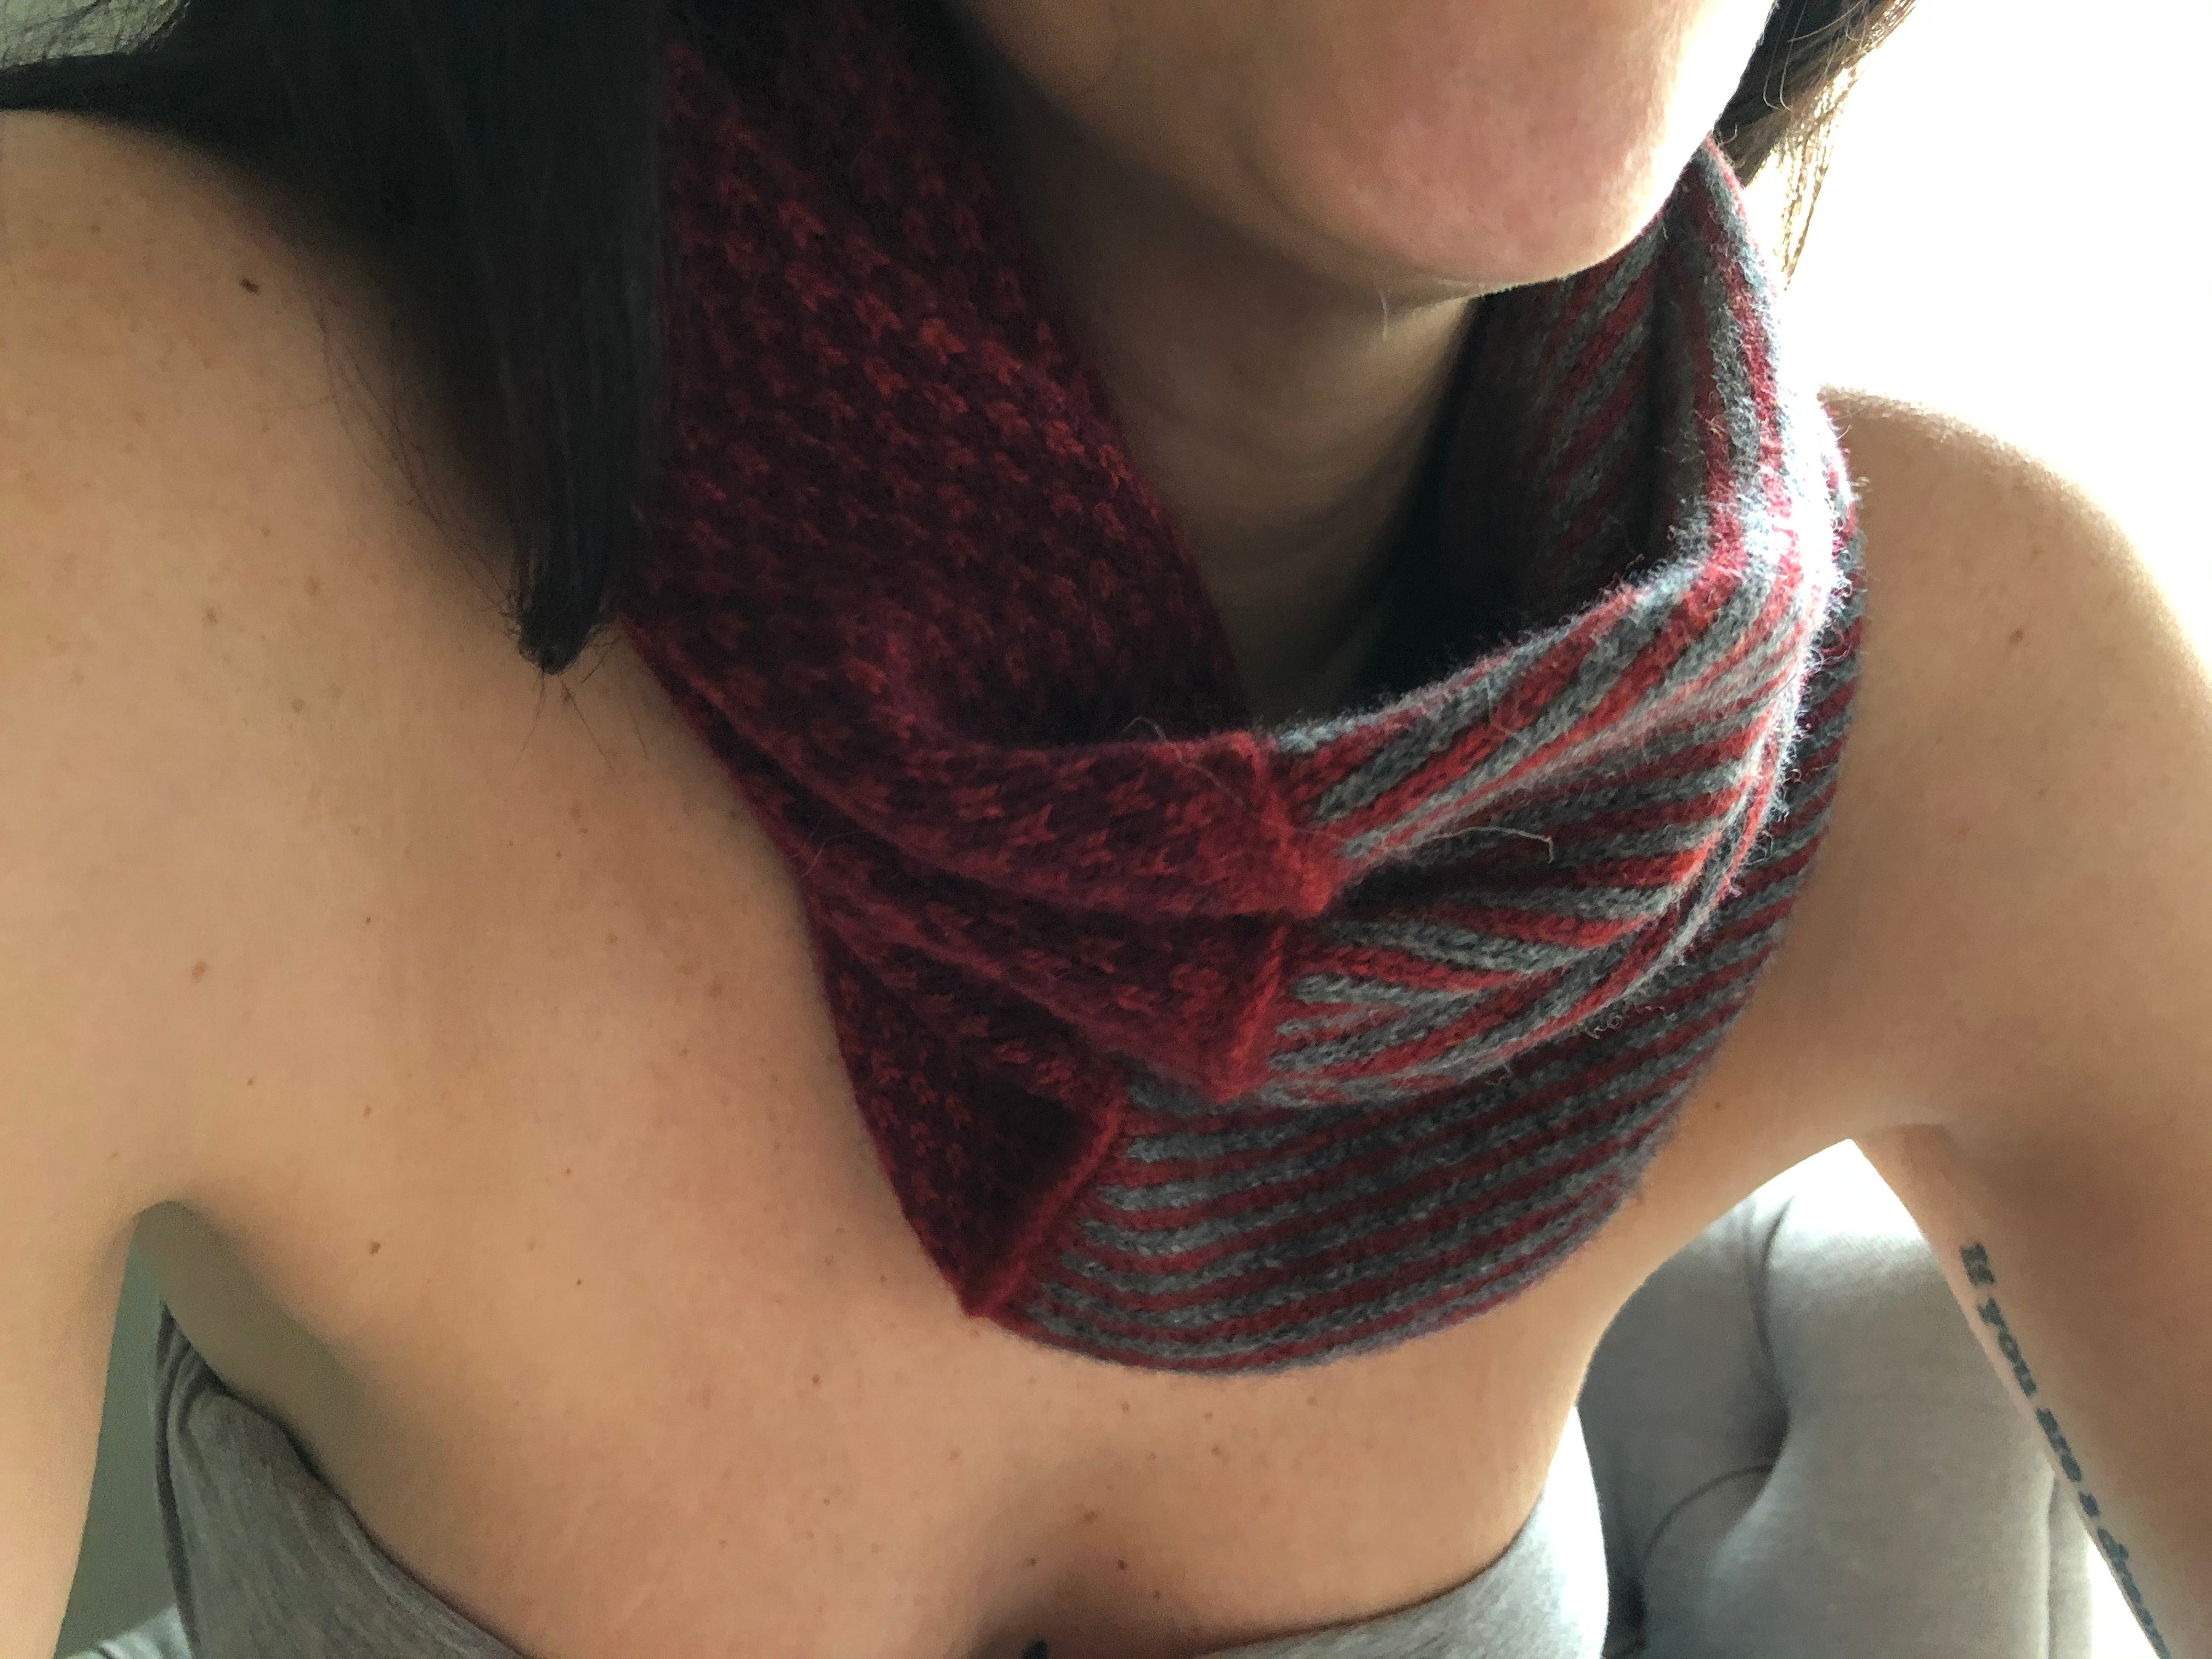 The Union Menswear Cowl in Cranberry/Burgundy/Mid Grey